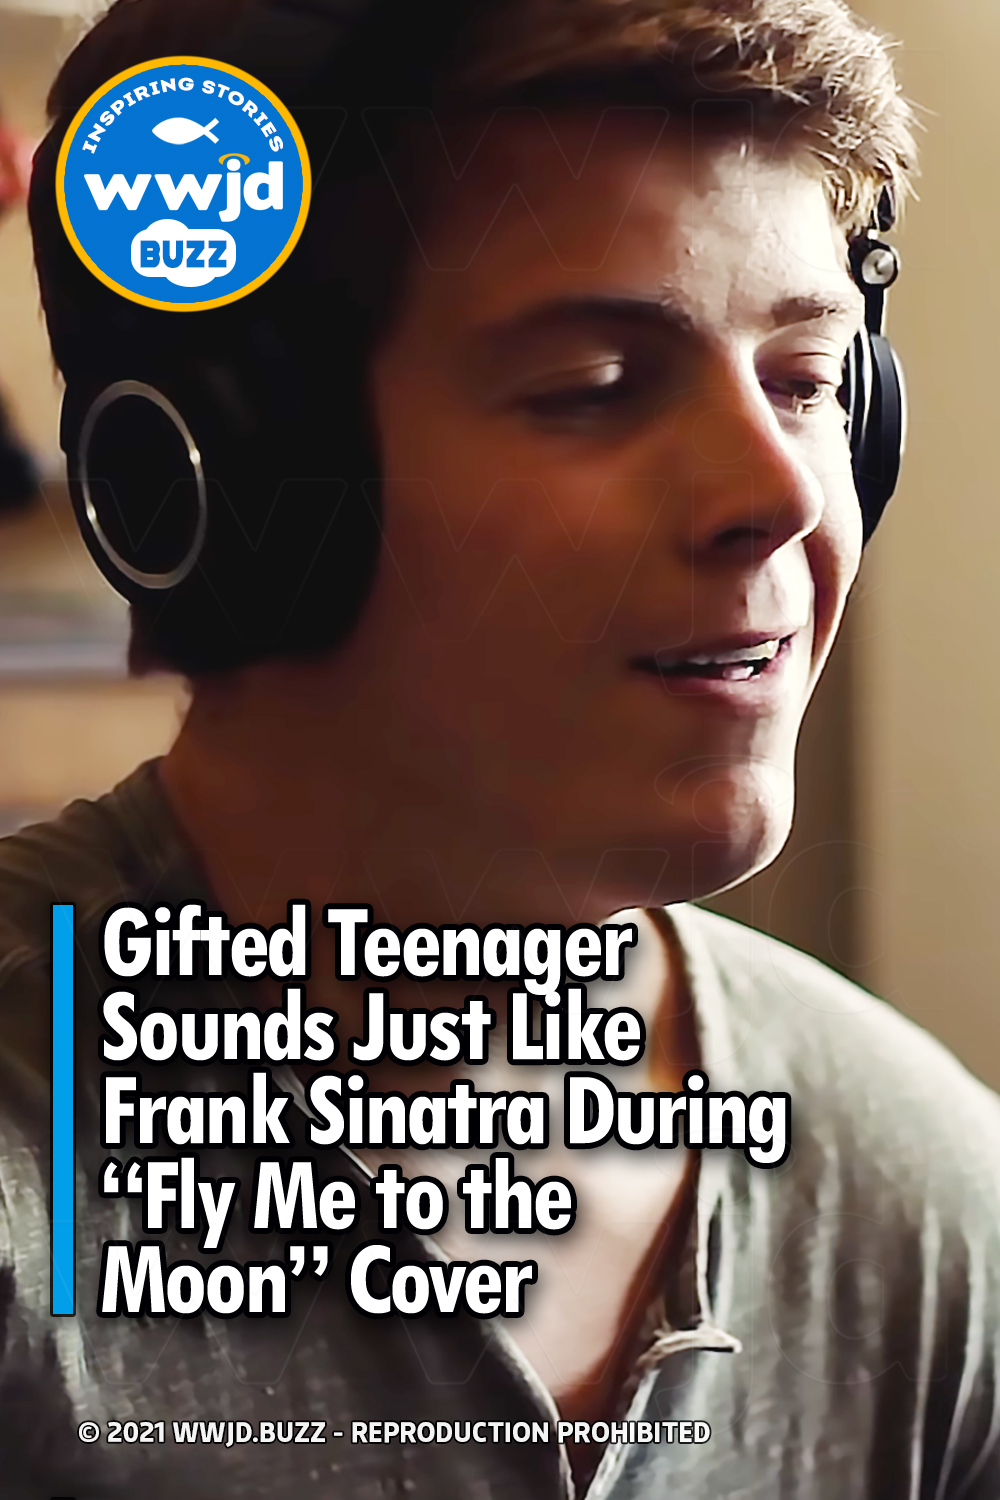 Gifted Teenager Sounds Just Like Frank Sinatra During “Fly Me to the Moon” Cover